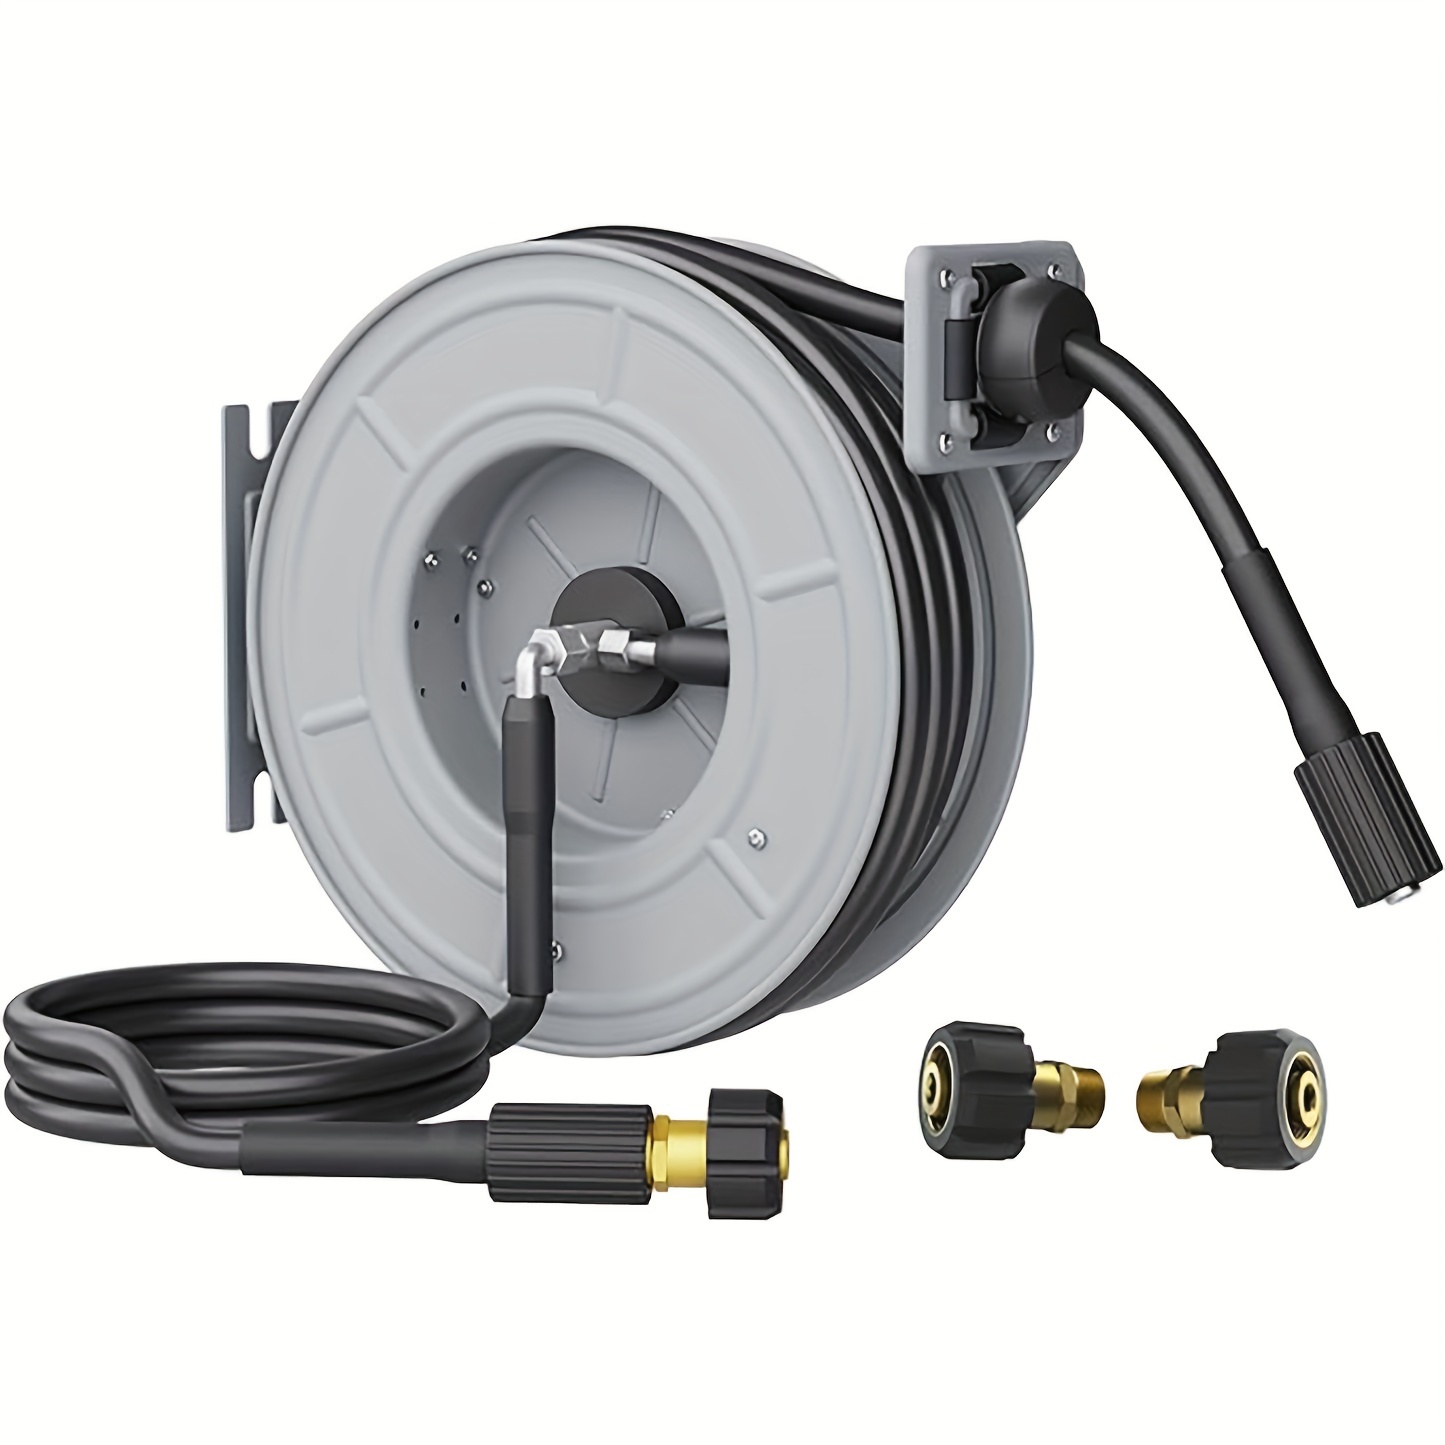 

Giraffe Tools Pressure Washer Hose Reel, 1/4" X 65 Ft Retractable Pressure Washer Reel, Steel Power Reel, Wall/ceiling/floor Mounted, 3200psi, 2 * M22-15mm Connectors, Heavy Duty